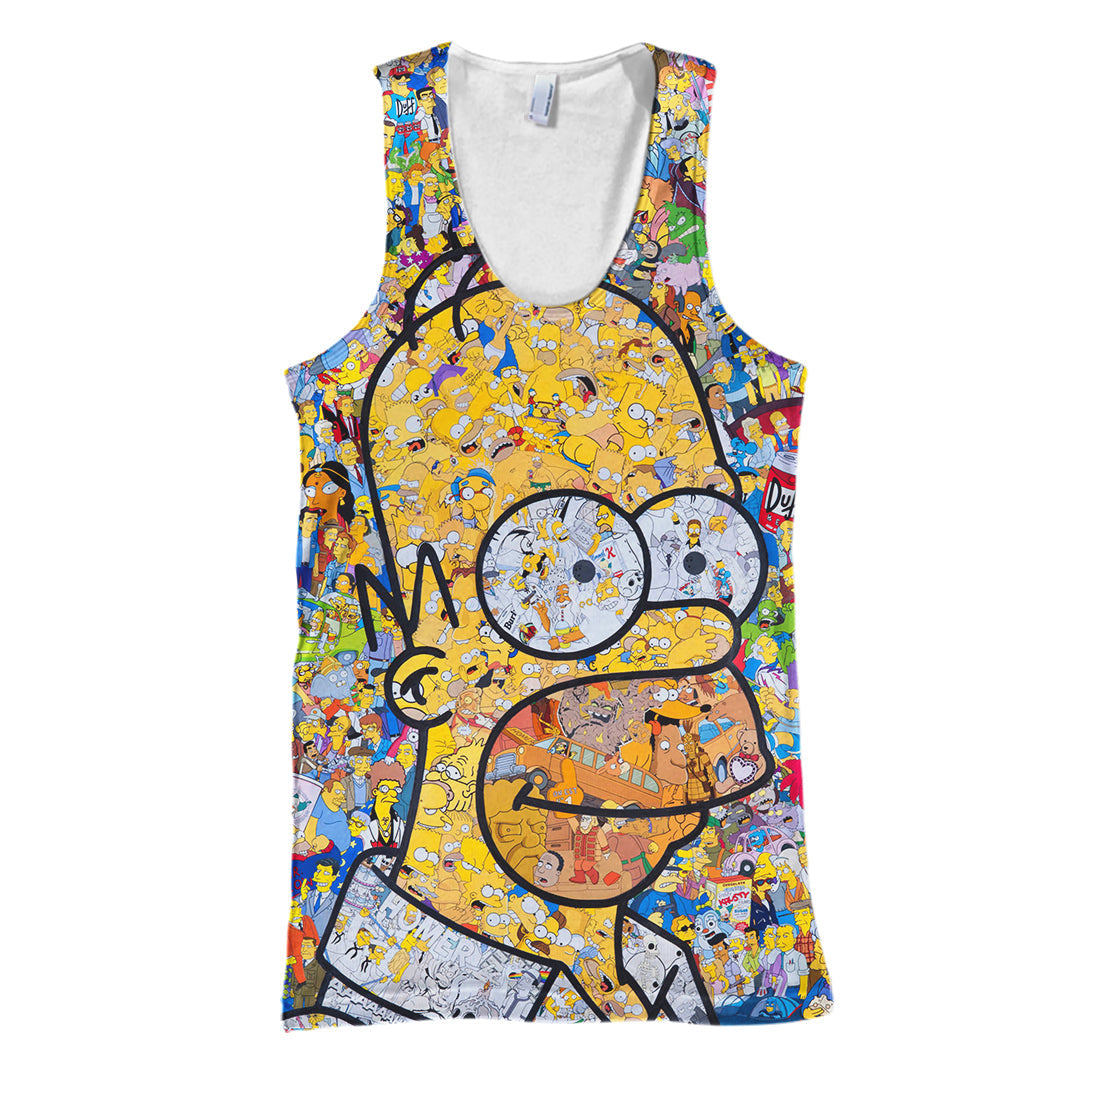 Unifinz The Simpsons Hoodie The Simpsons Art 3D Print T-shirt Awesome The Simpsons Shirt Sweater Tank 2026